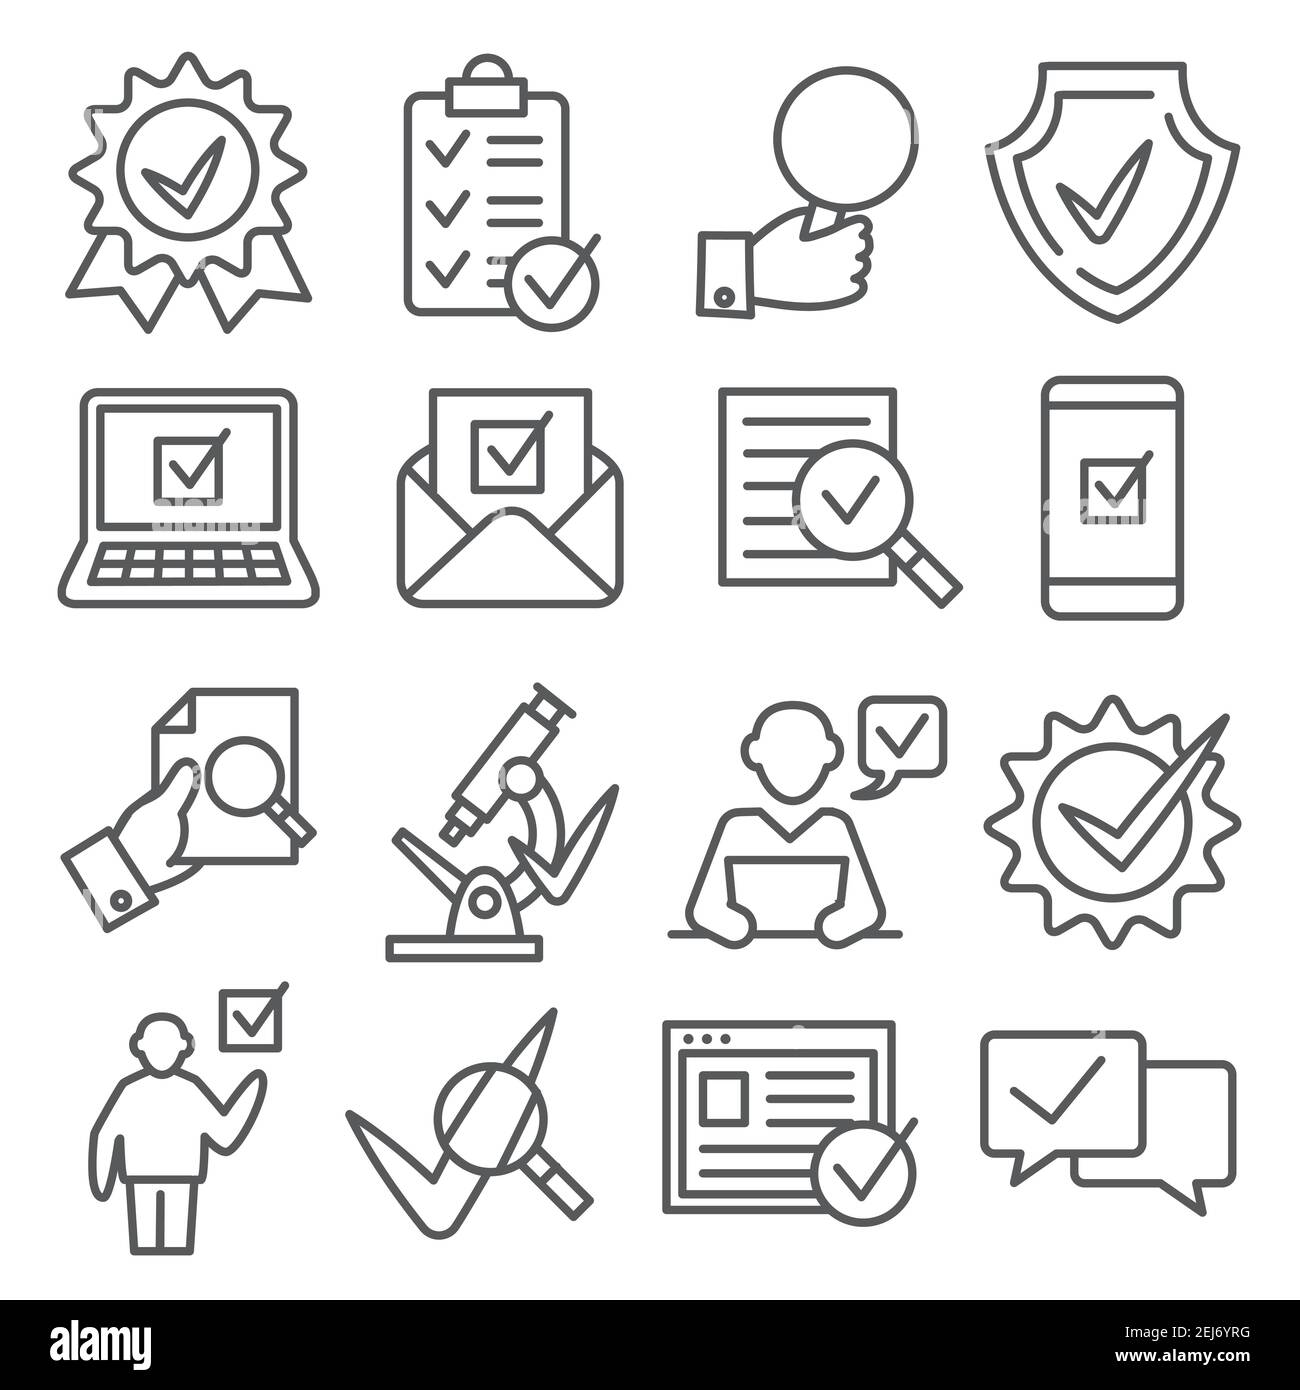 Check and quality line icons on white background Stock Vector